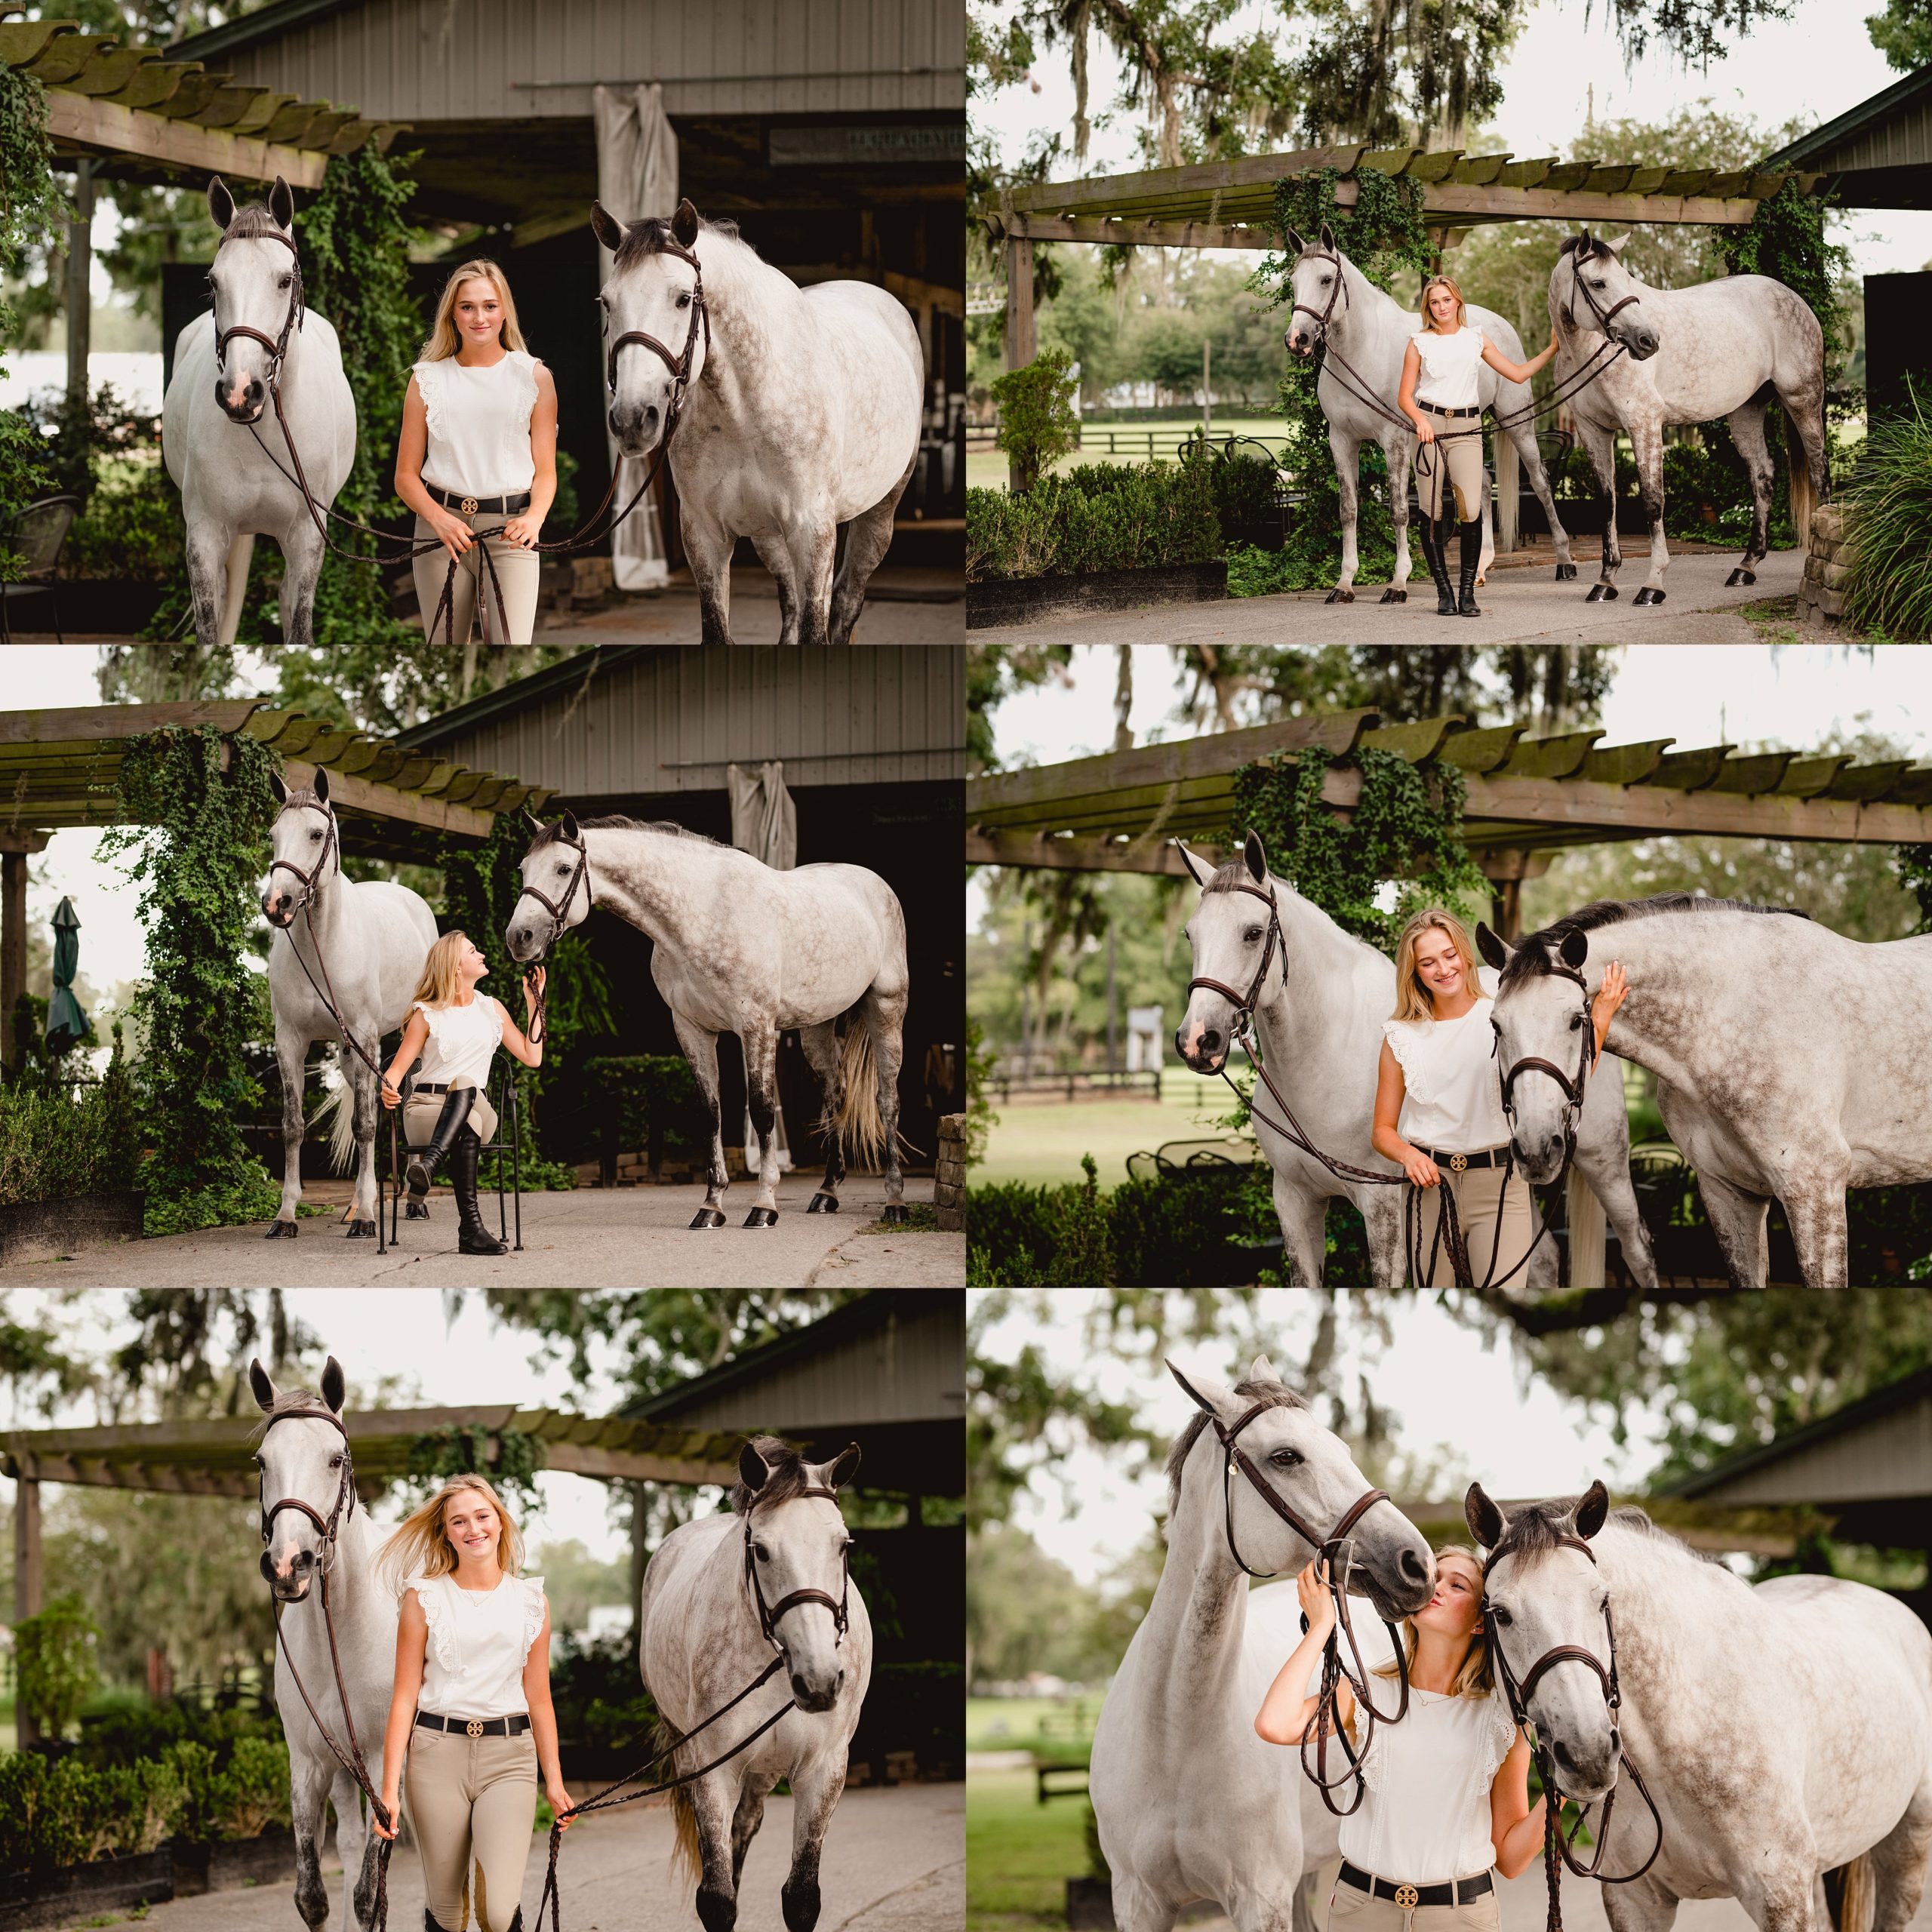 Equestrian and her two grey horses. Horse and rider photoshoot with two horses.